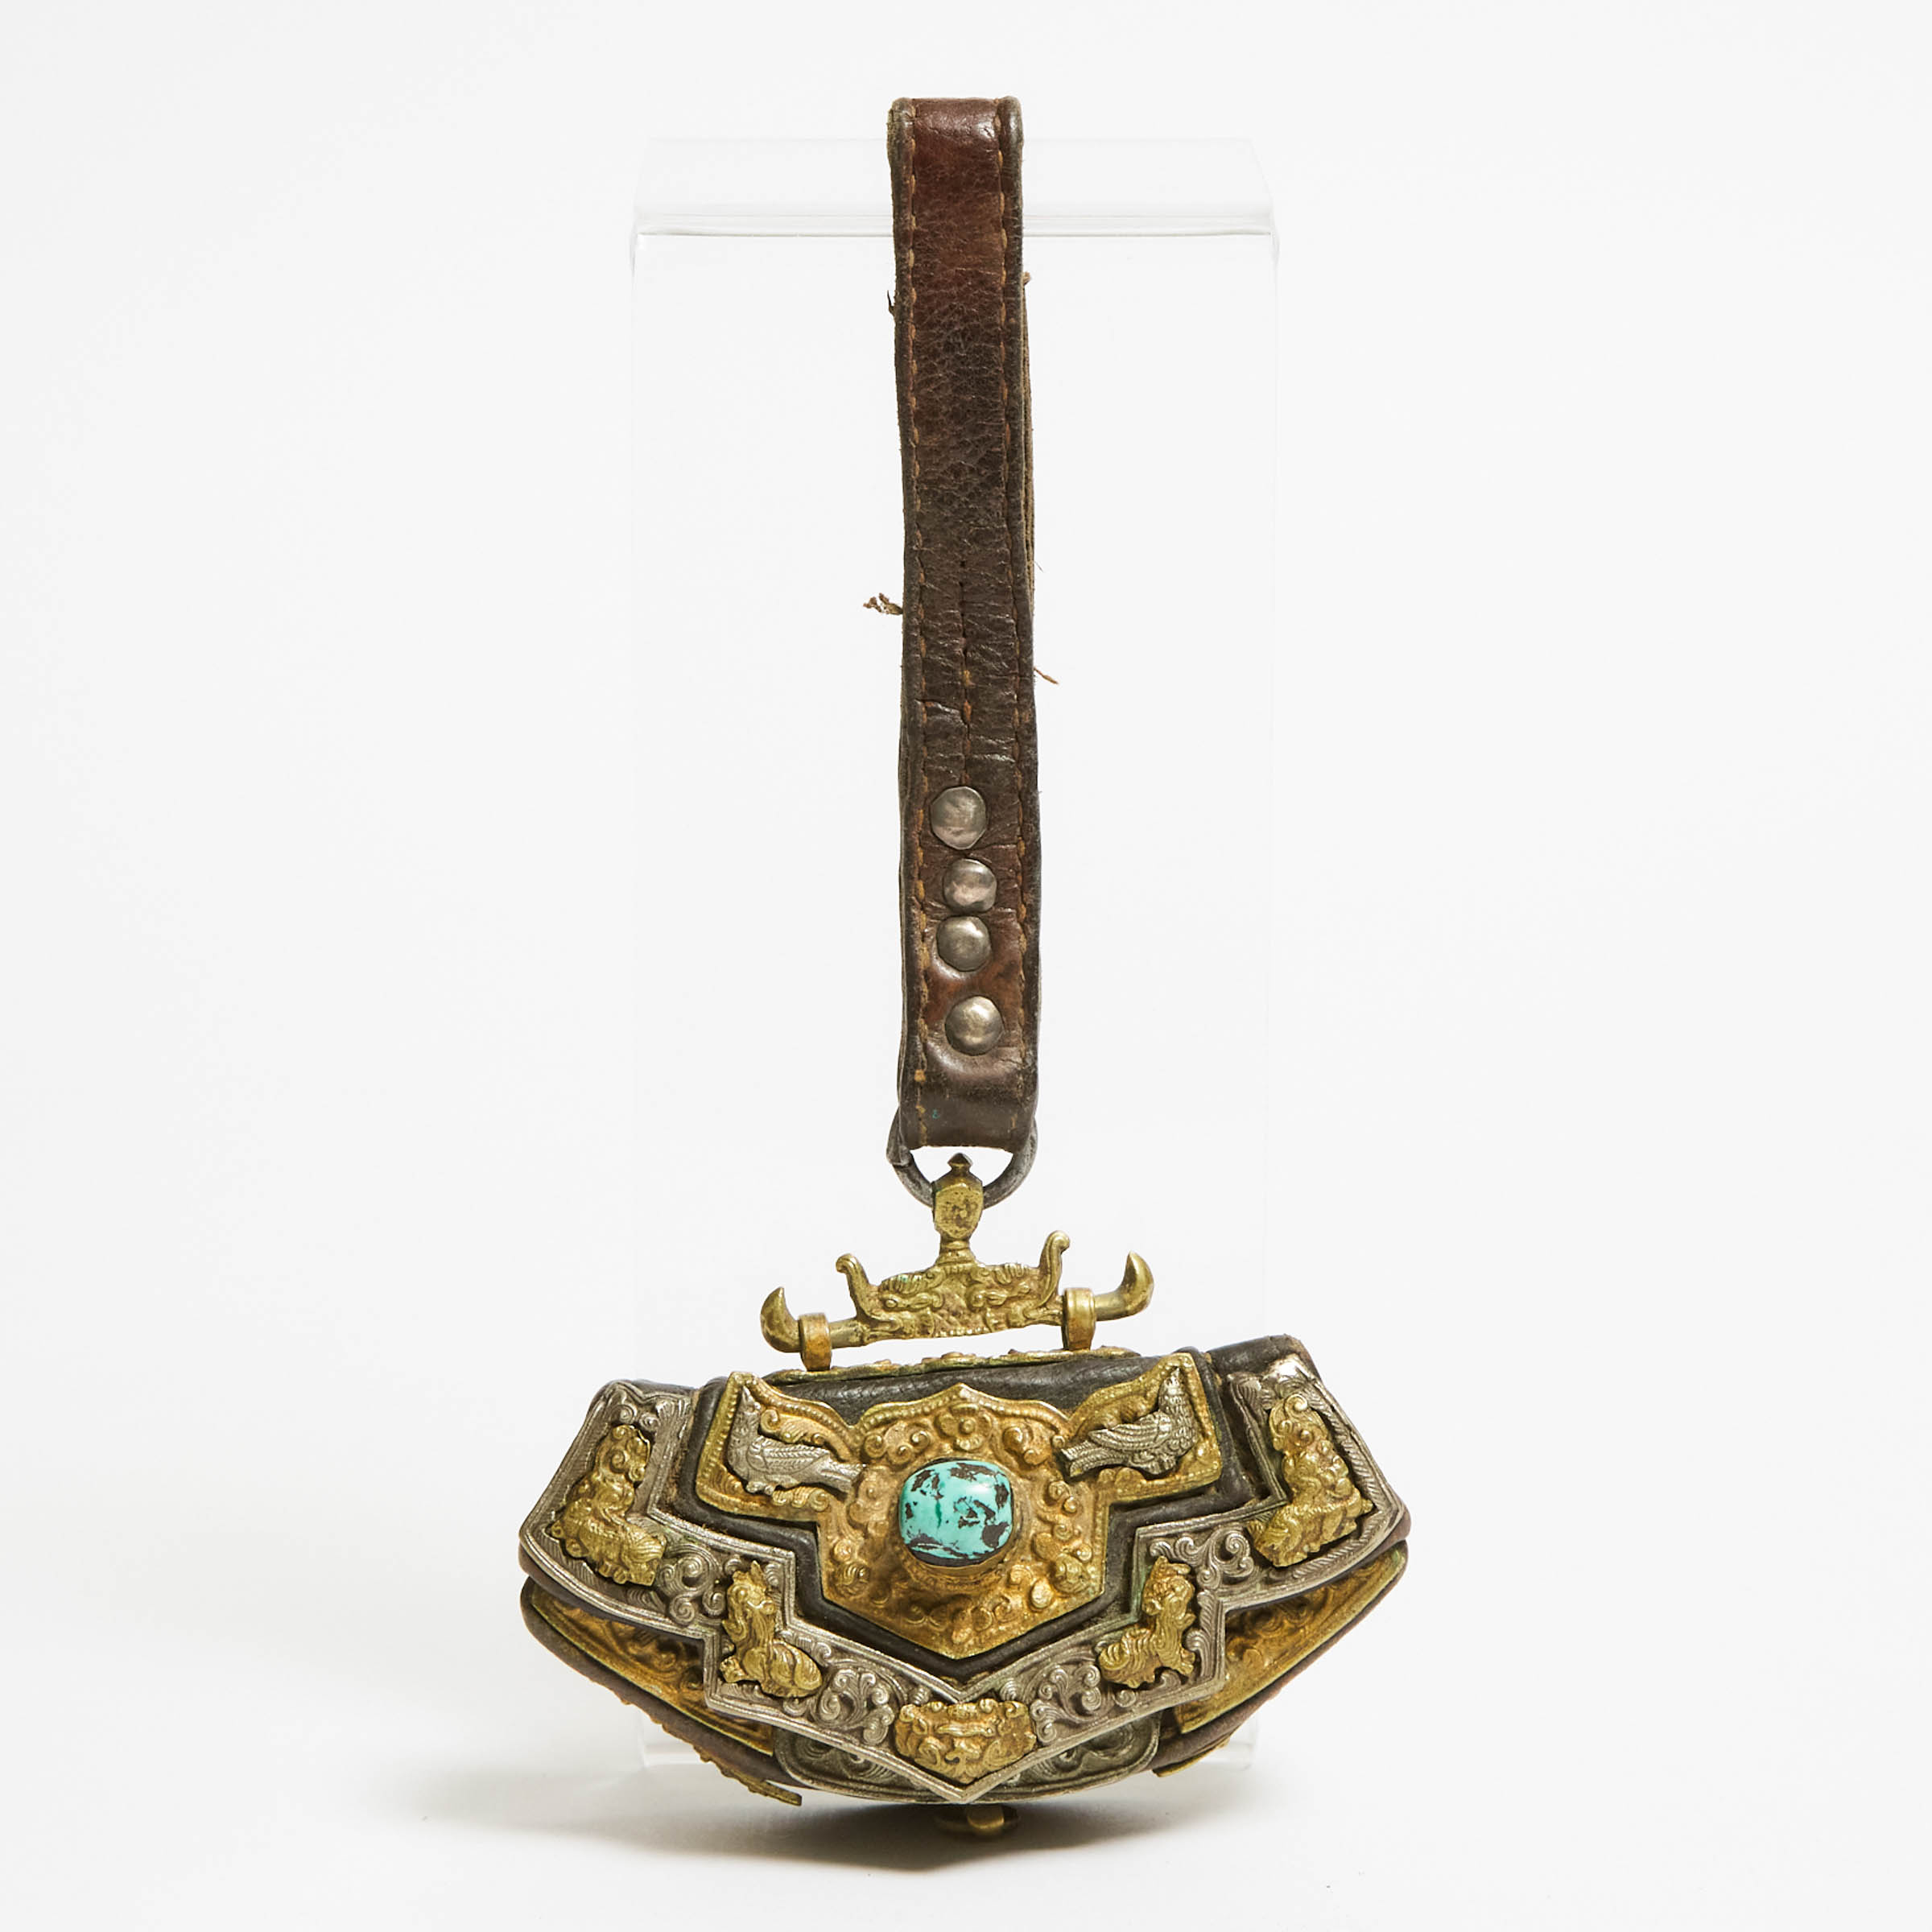 A Tibetan Silver and Gilt Bronze-Fitted Leather Flint Pouch, 18th/19th Century